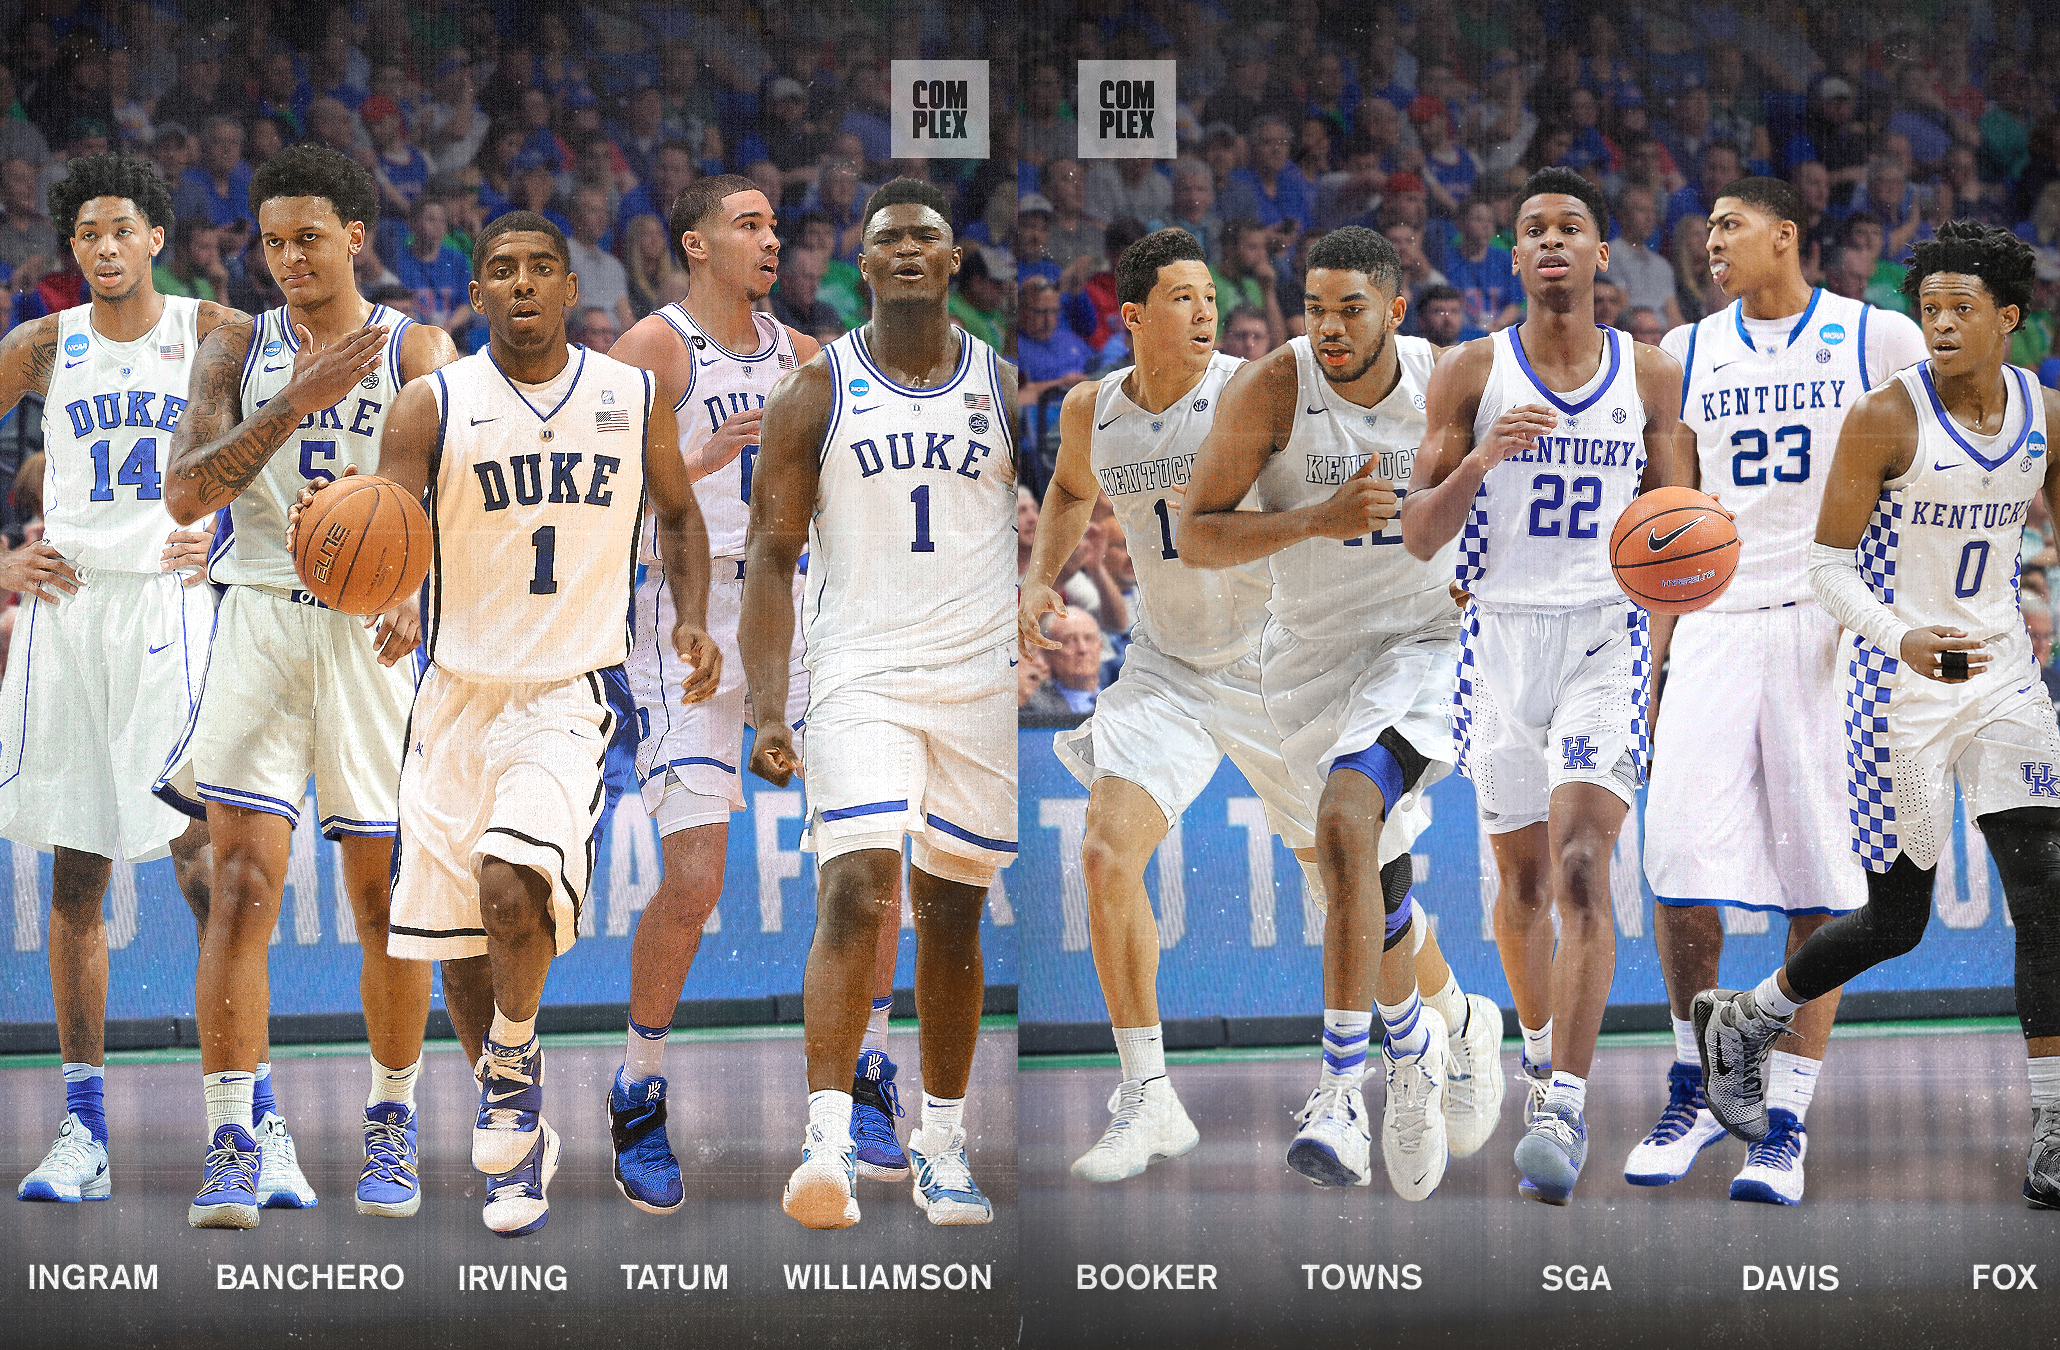 Duke and Kentucky basketball players side by side in uniform, no identifiable persons, on a stylized court background